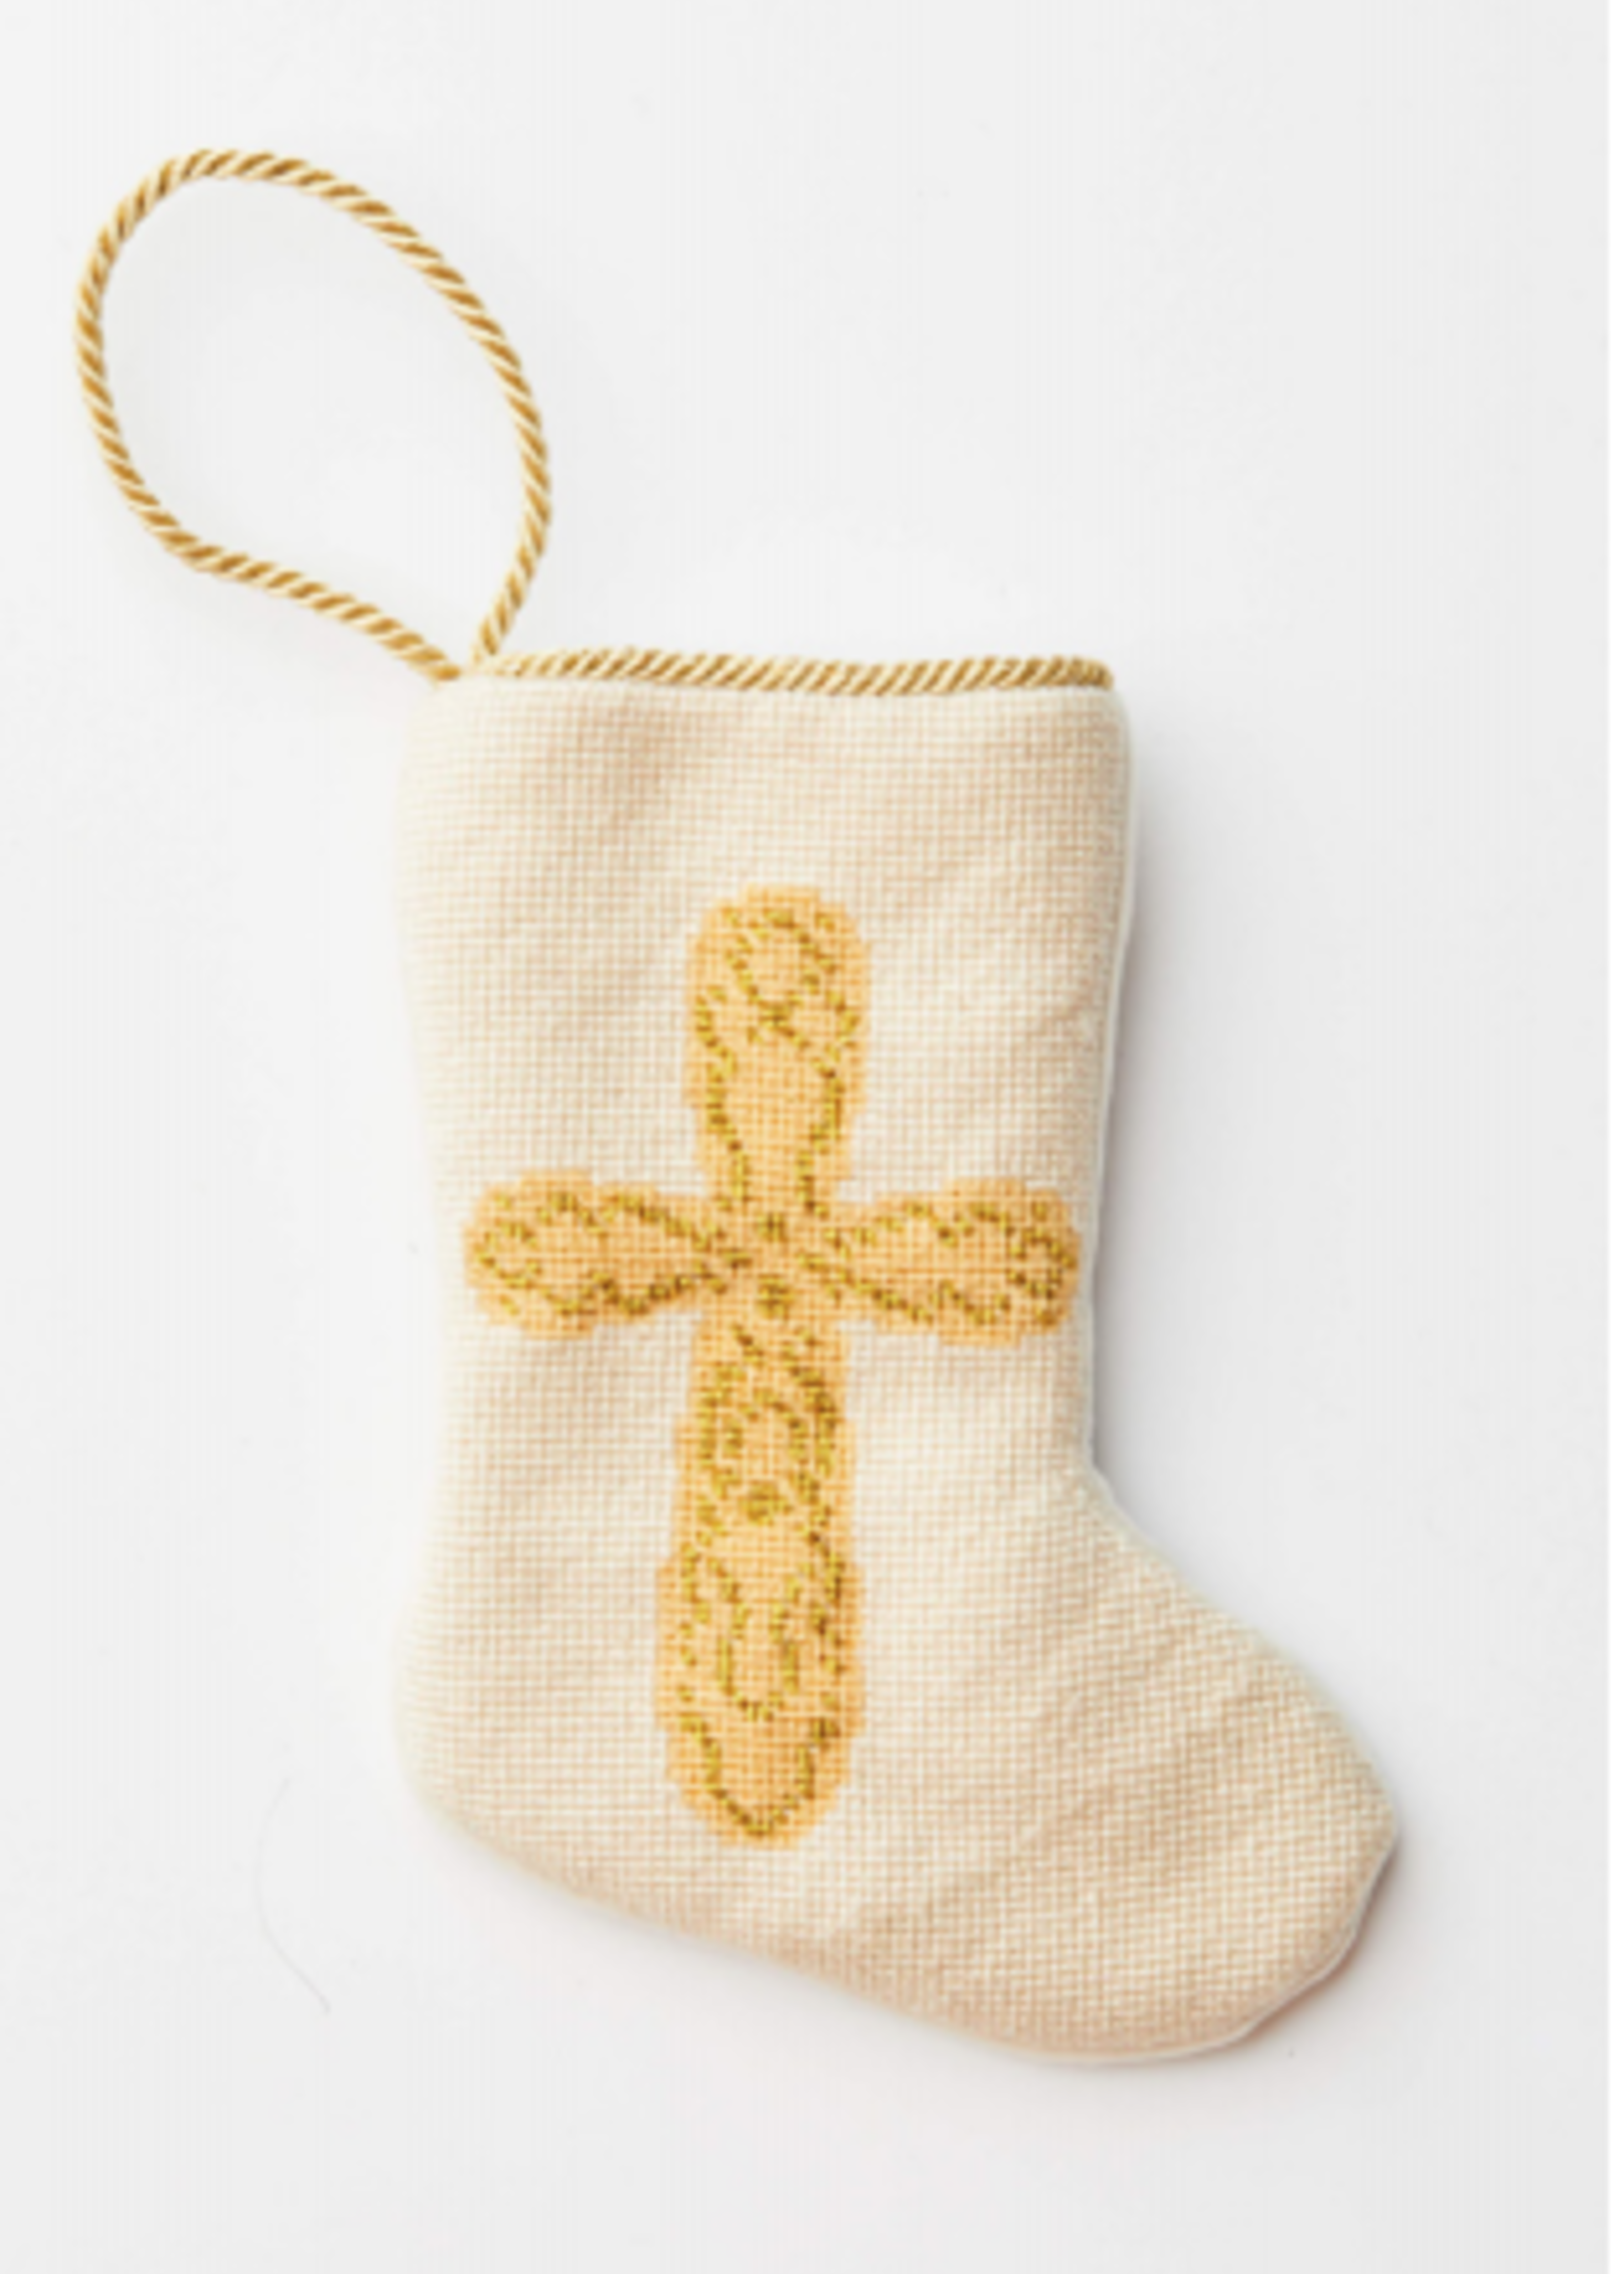 Bauble Stockings Bauble Stocking Prince of Peace